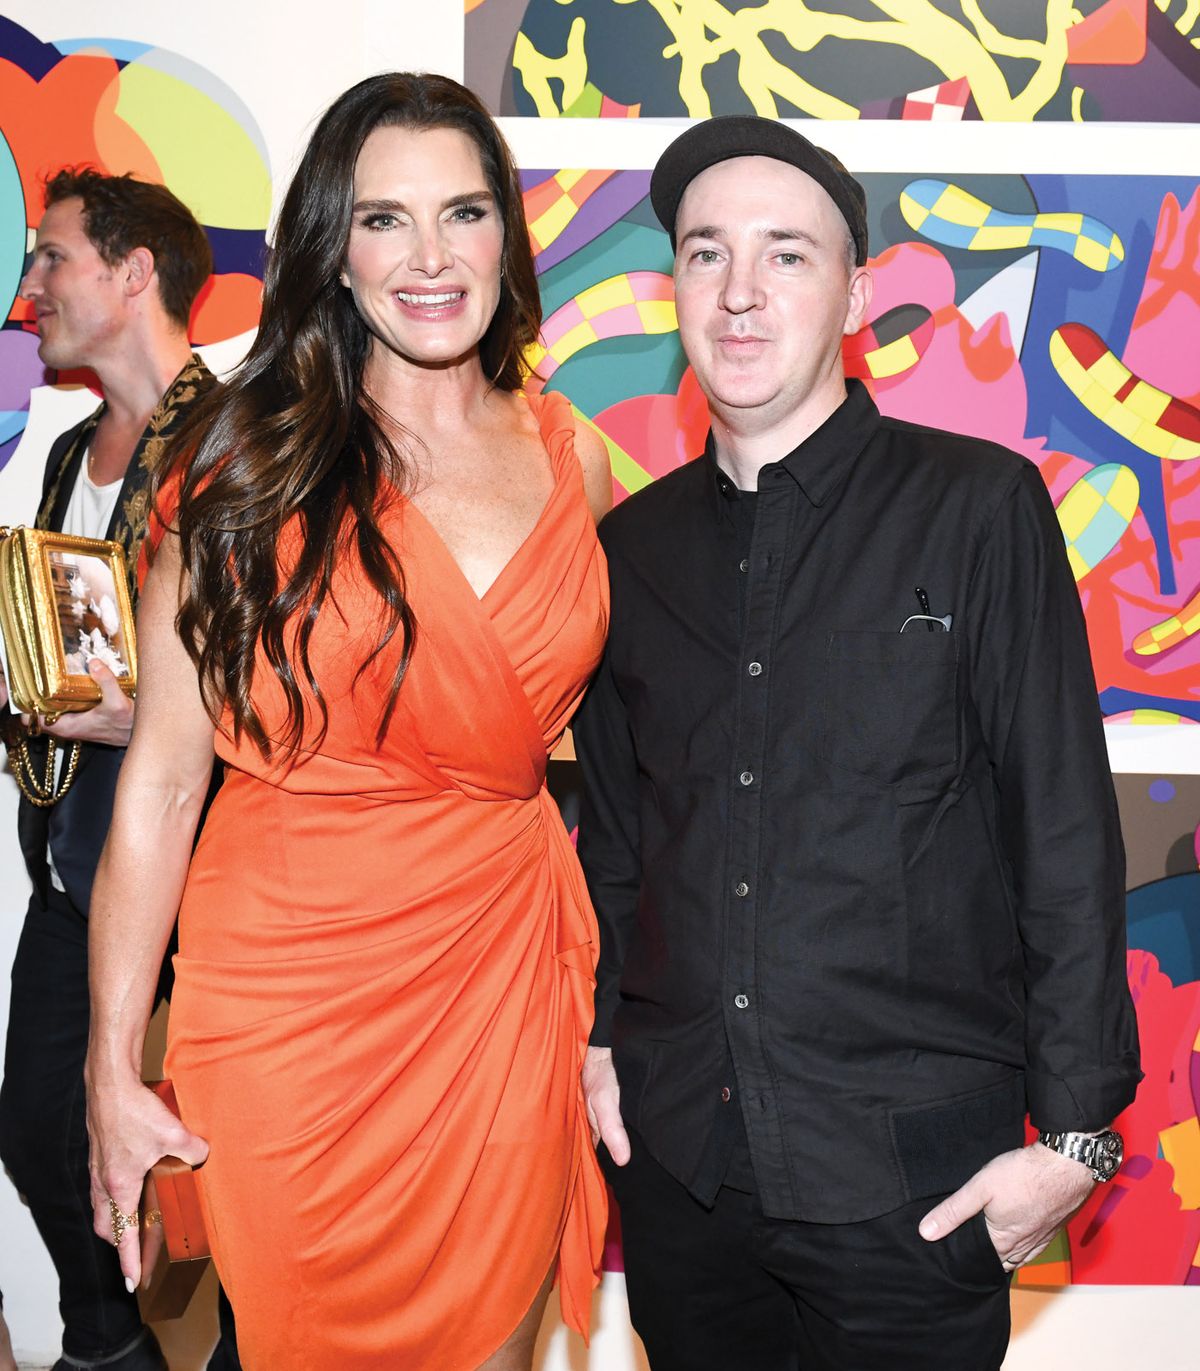 Brooke Shields snapped with the Tribeca  Ball’s guest of honour Kaws (Brian Donnelly) Courtesy of BFA